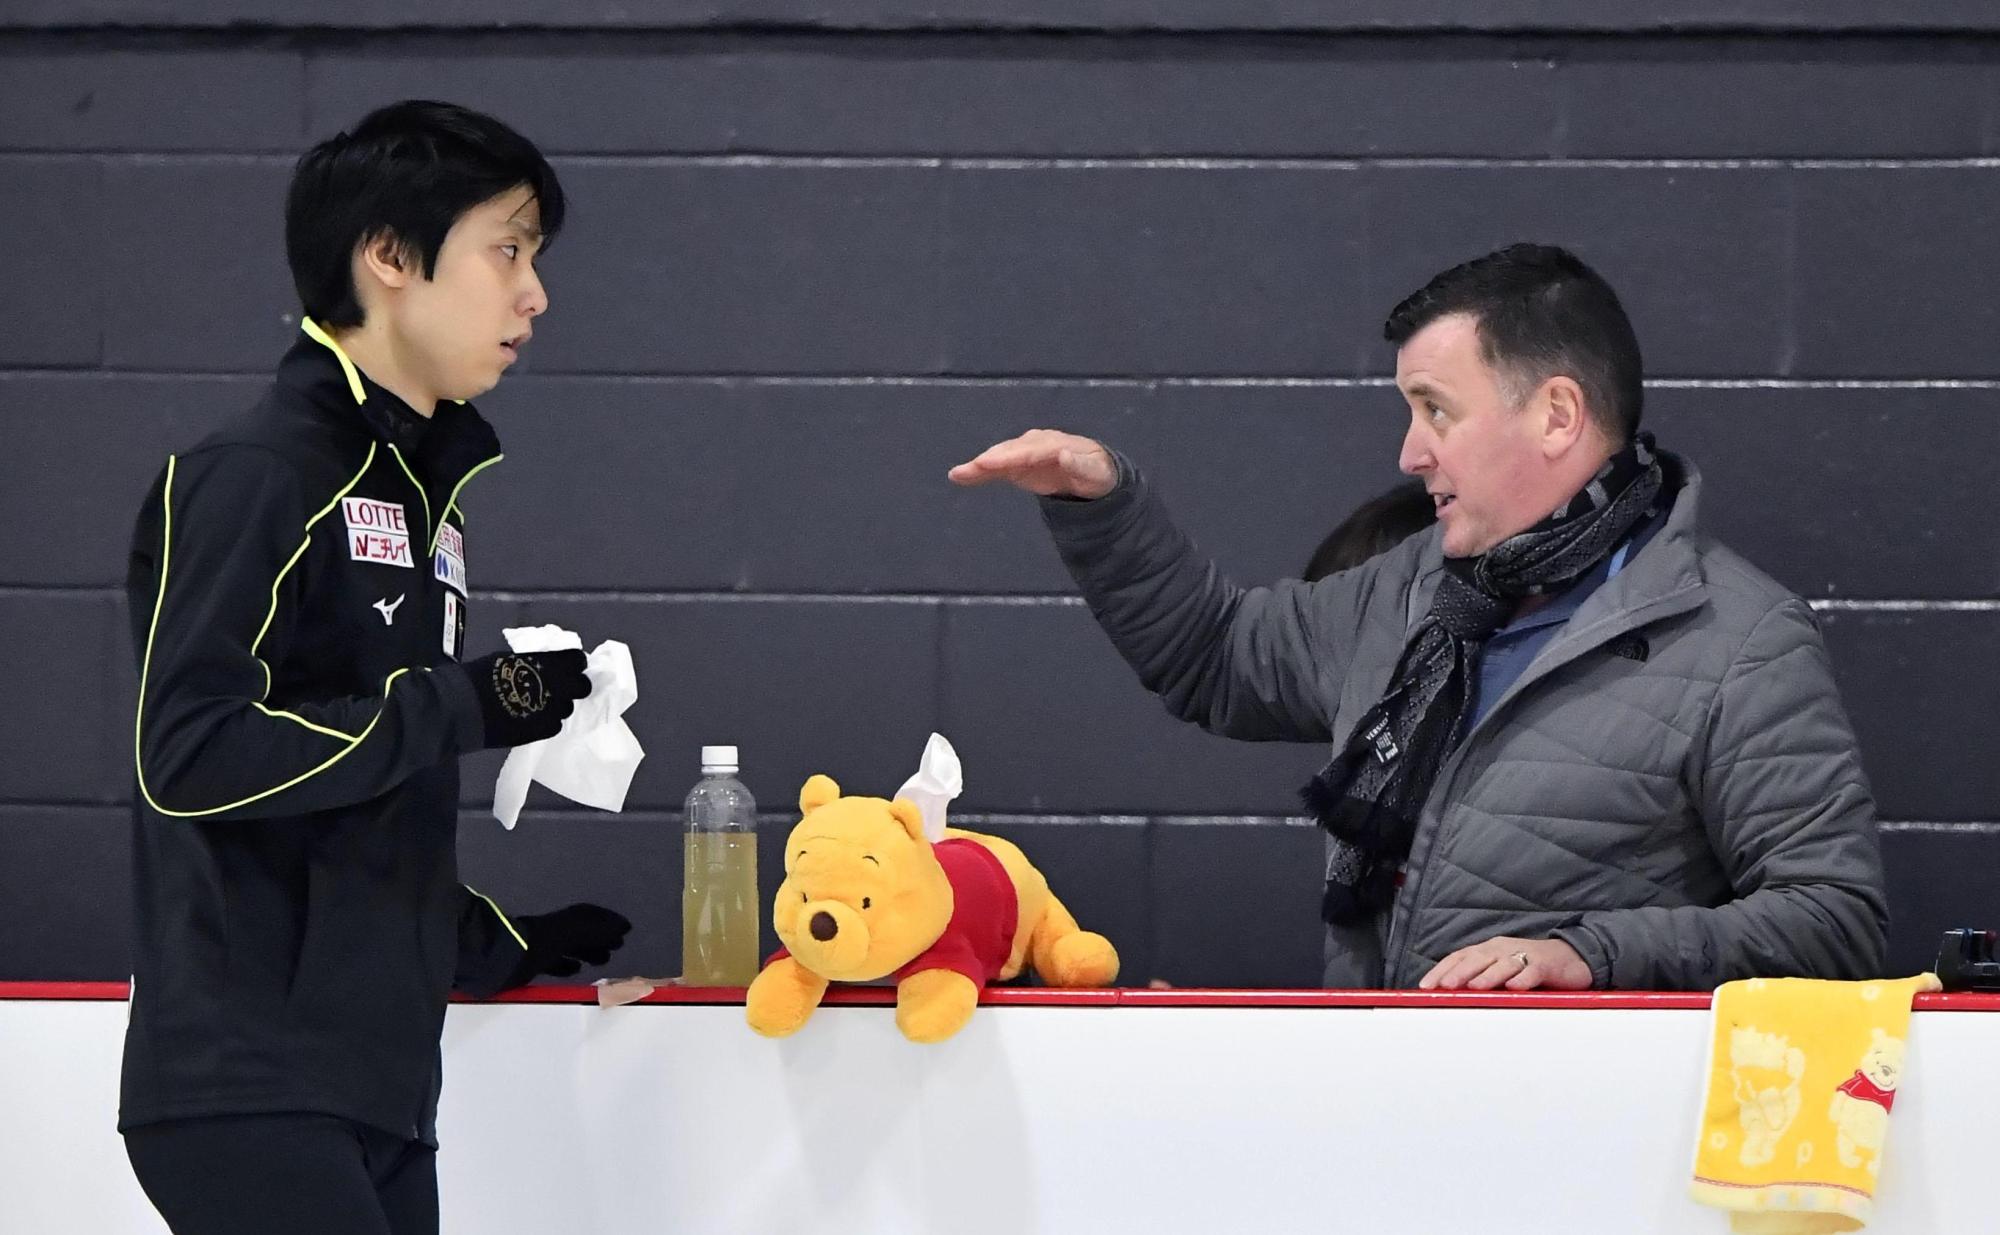 Coach Orser says teamwork can pay off for Hanyu | The Japan Times